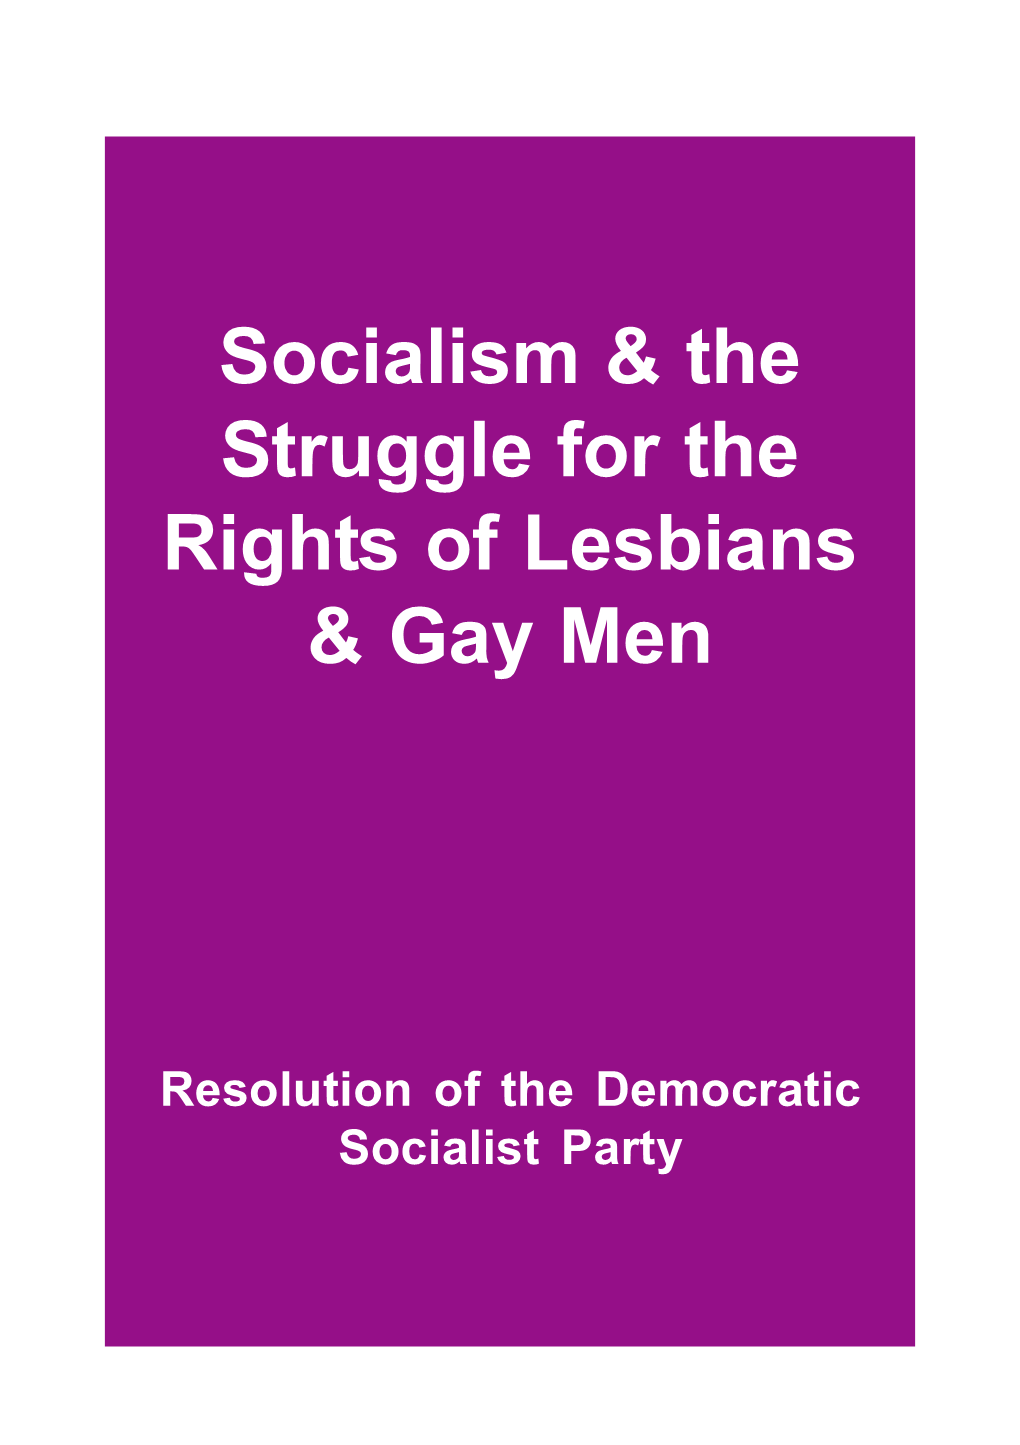 Socialism & the Struggle for the Rights of Lesbians & Gay